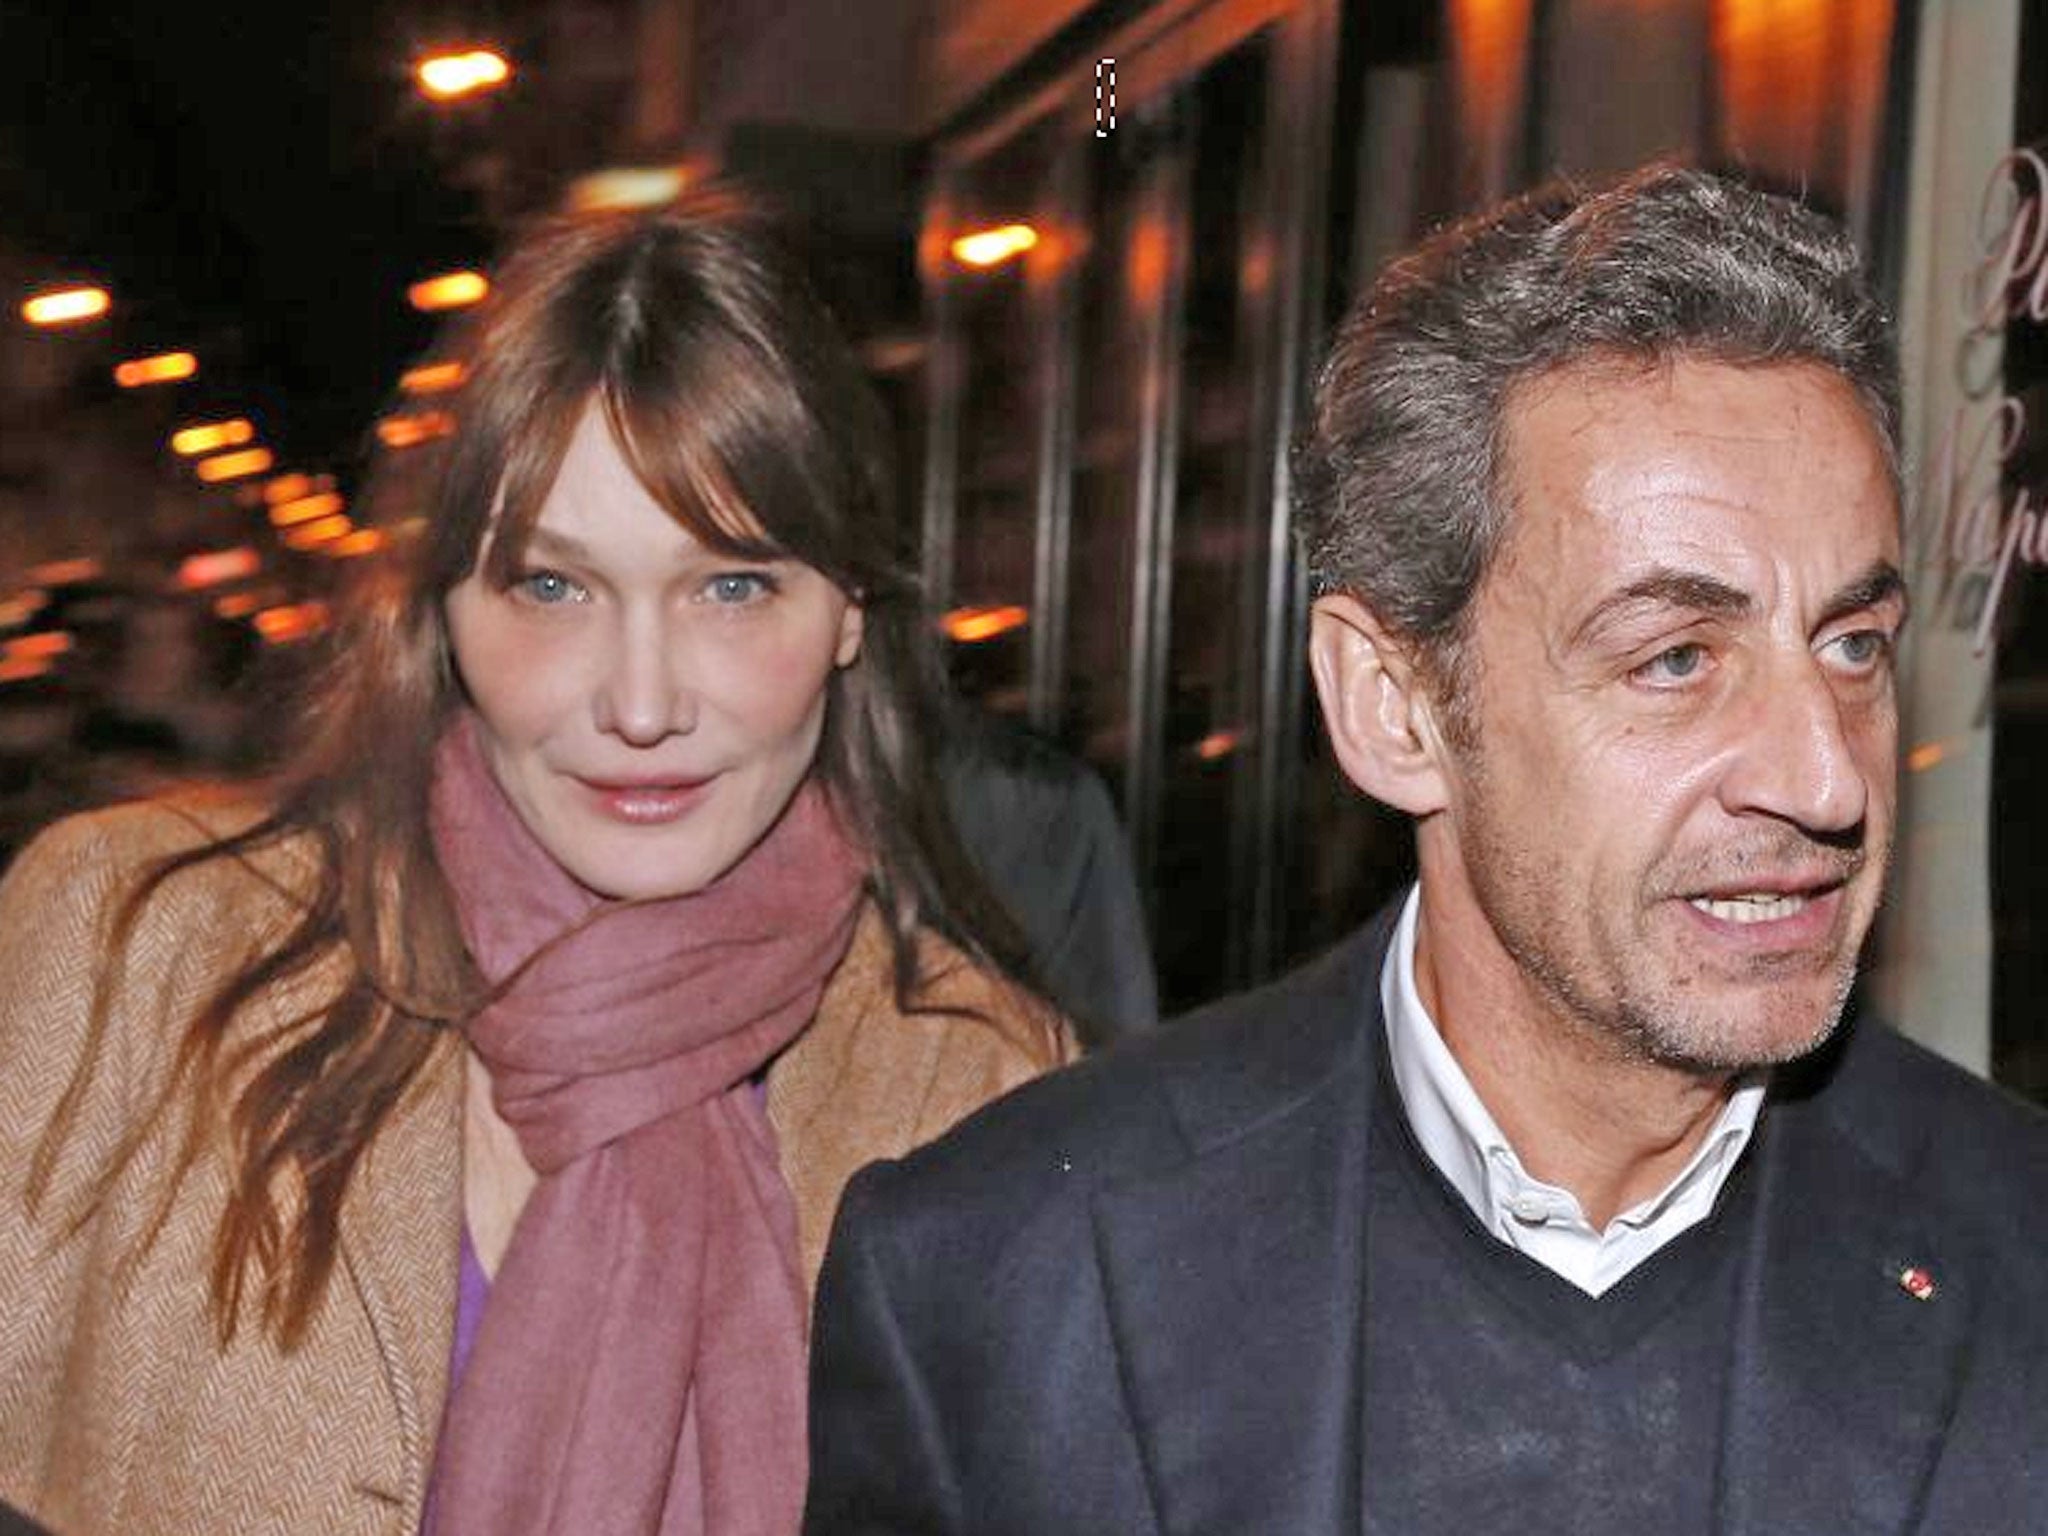 A tearful Carla Bruni,left, has dismissed as “unthinkable” the accusation that her husband, Nicolas Sarkozy, right, took advantage of the mental frailty of an elderly billionaire to finance his rise to power